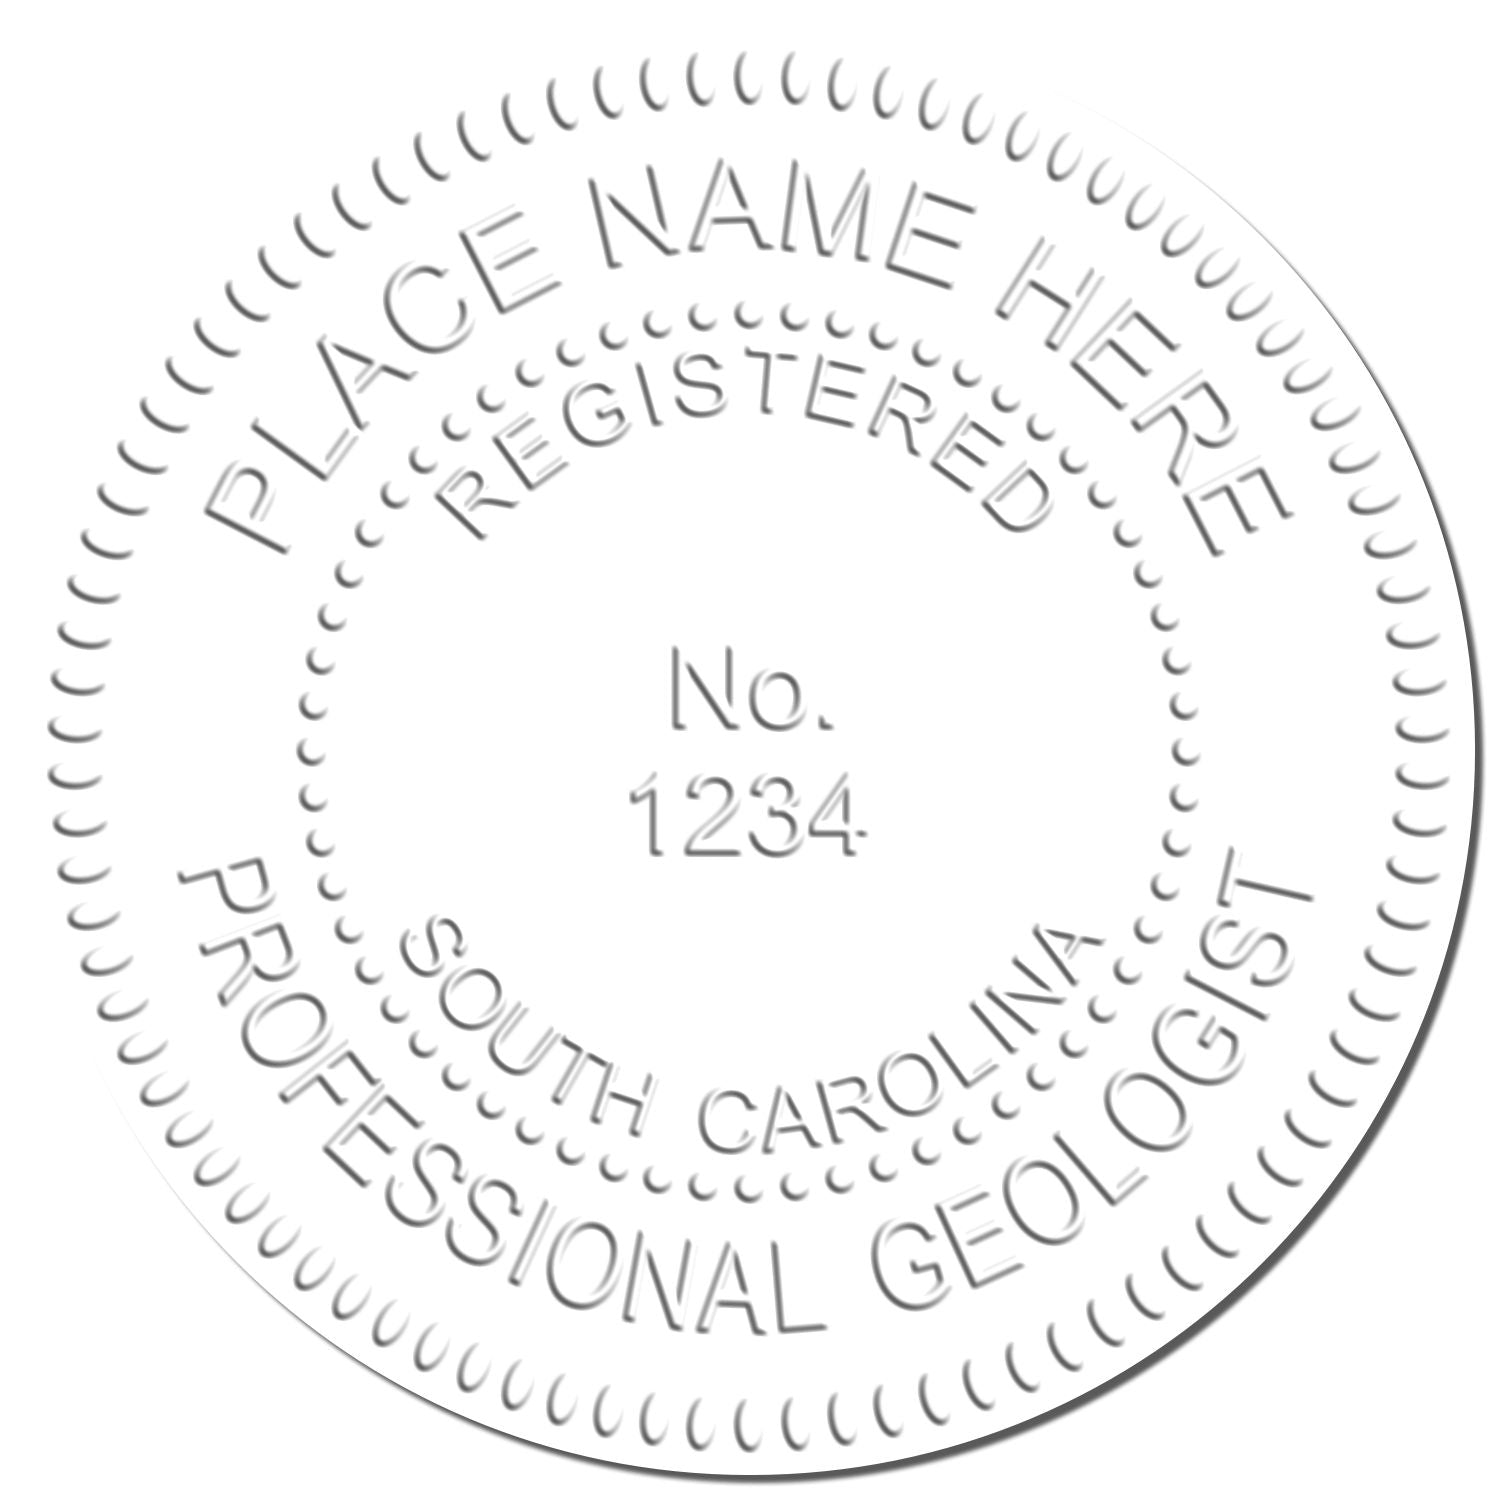 A photograph of the State of South Carolina Extended Long Reach Geologist Seal stamp impression reveals a vivid, professional image of the on paper.